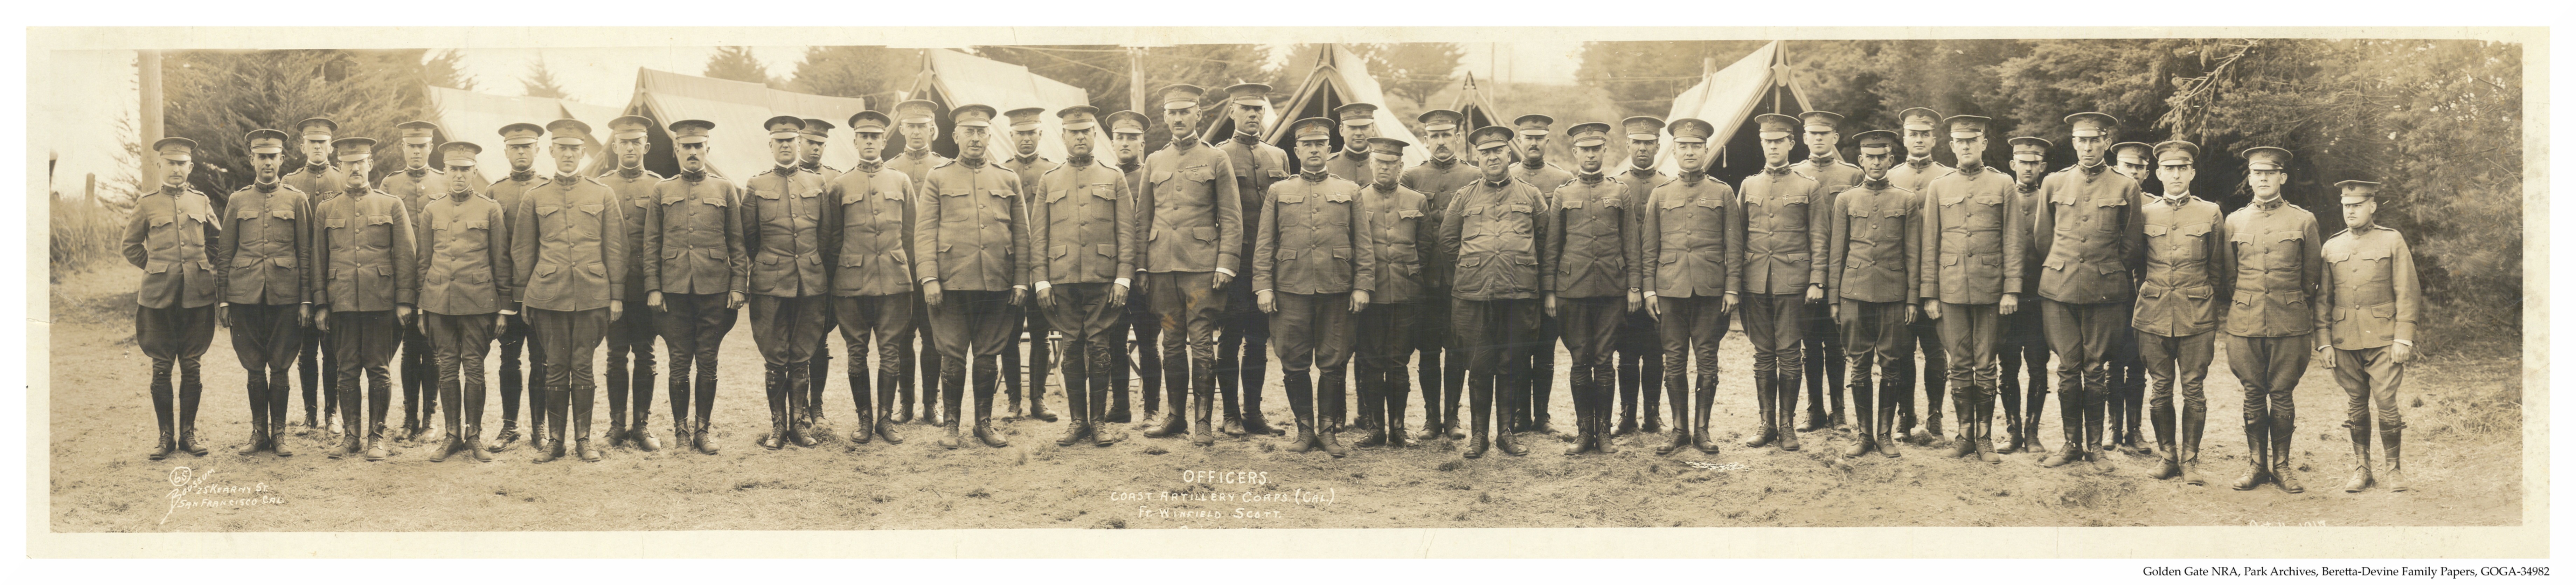 Coast Artillery Corps officers taken at Fort Winfield Scott at the Presidio of San Francisco in 1917